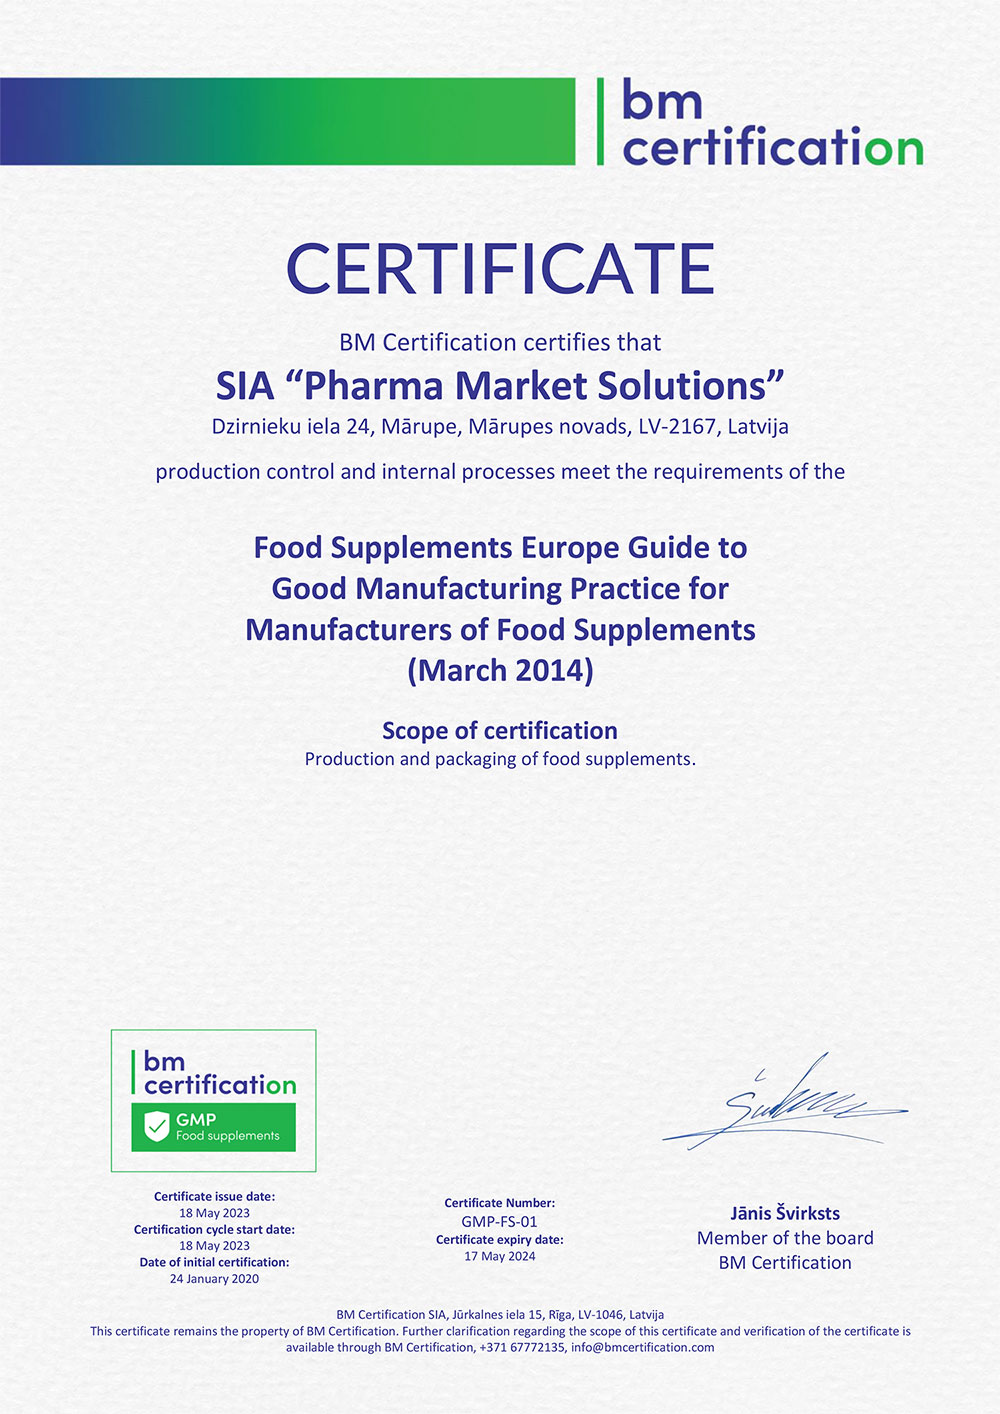 Pharma-Manufacture-dietary-supplemnts-manufacturing-gmp-certificate-good-manufactruing-practice-europe